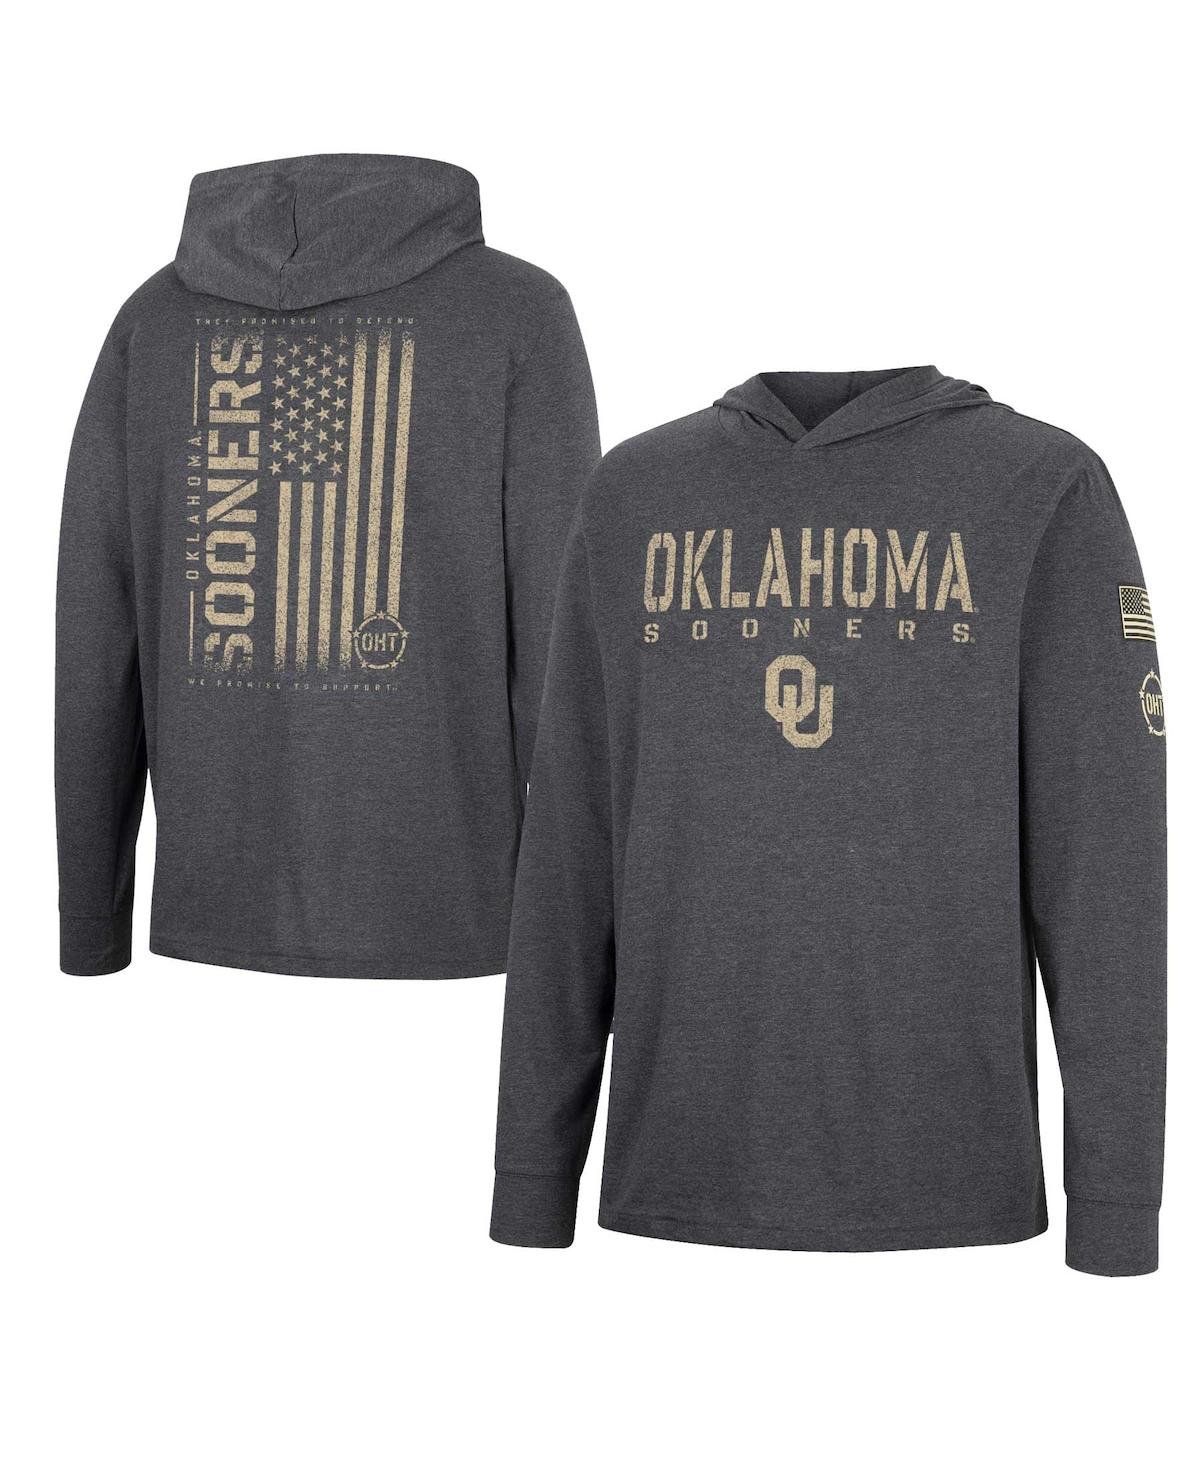 Men's Colosseum Charcoal Oklahoma Sooners Team Oht Military-Inspired Appreciation Hoodie Long Sleeve T-shirt - Charcoal